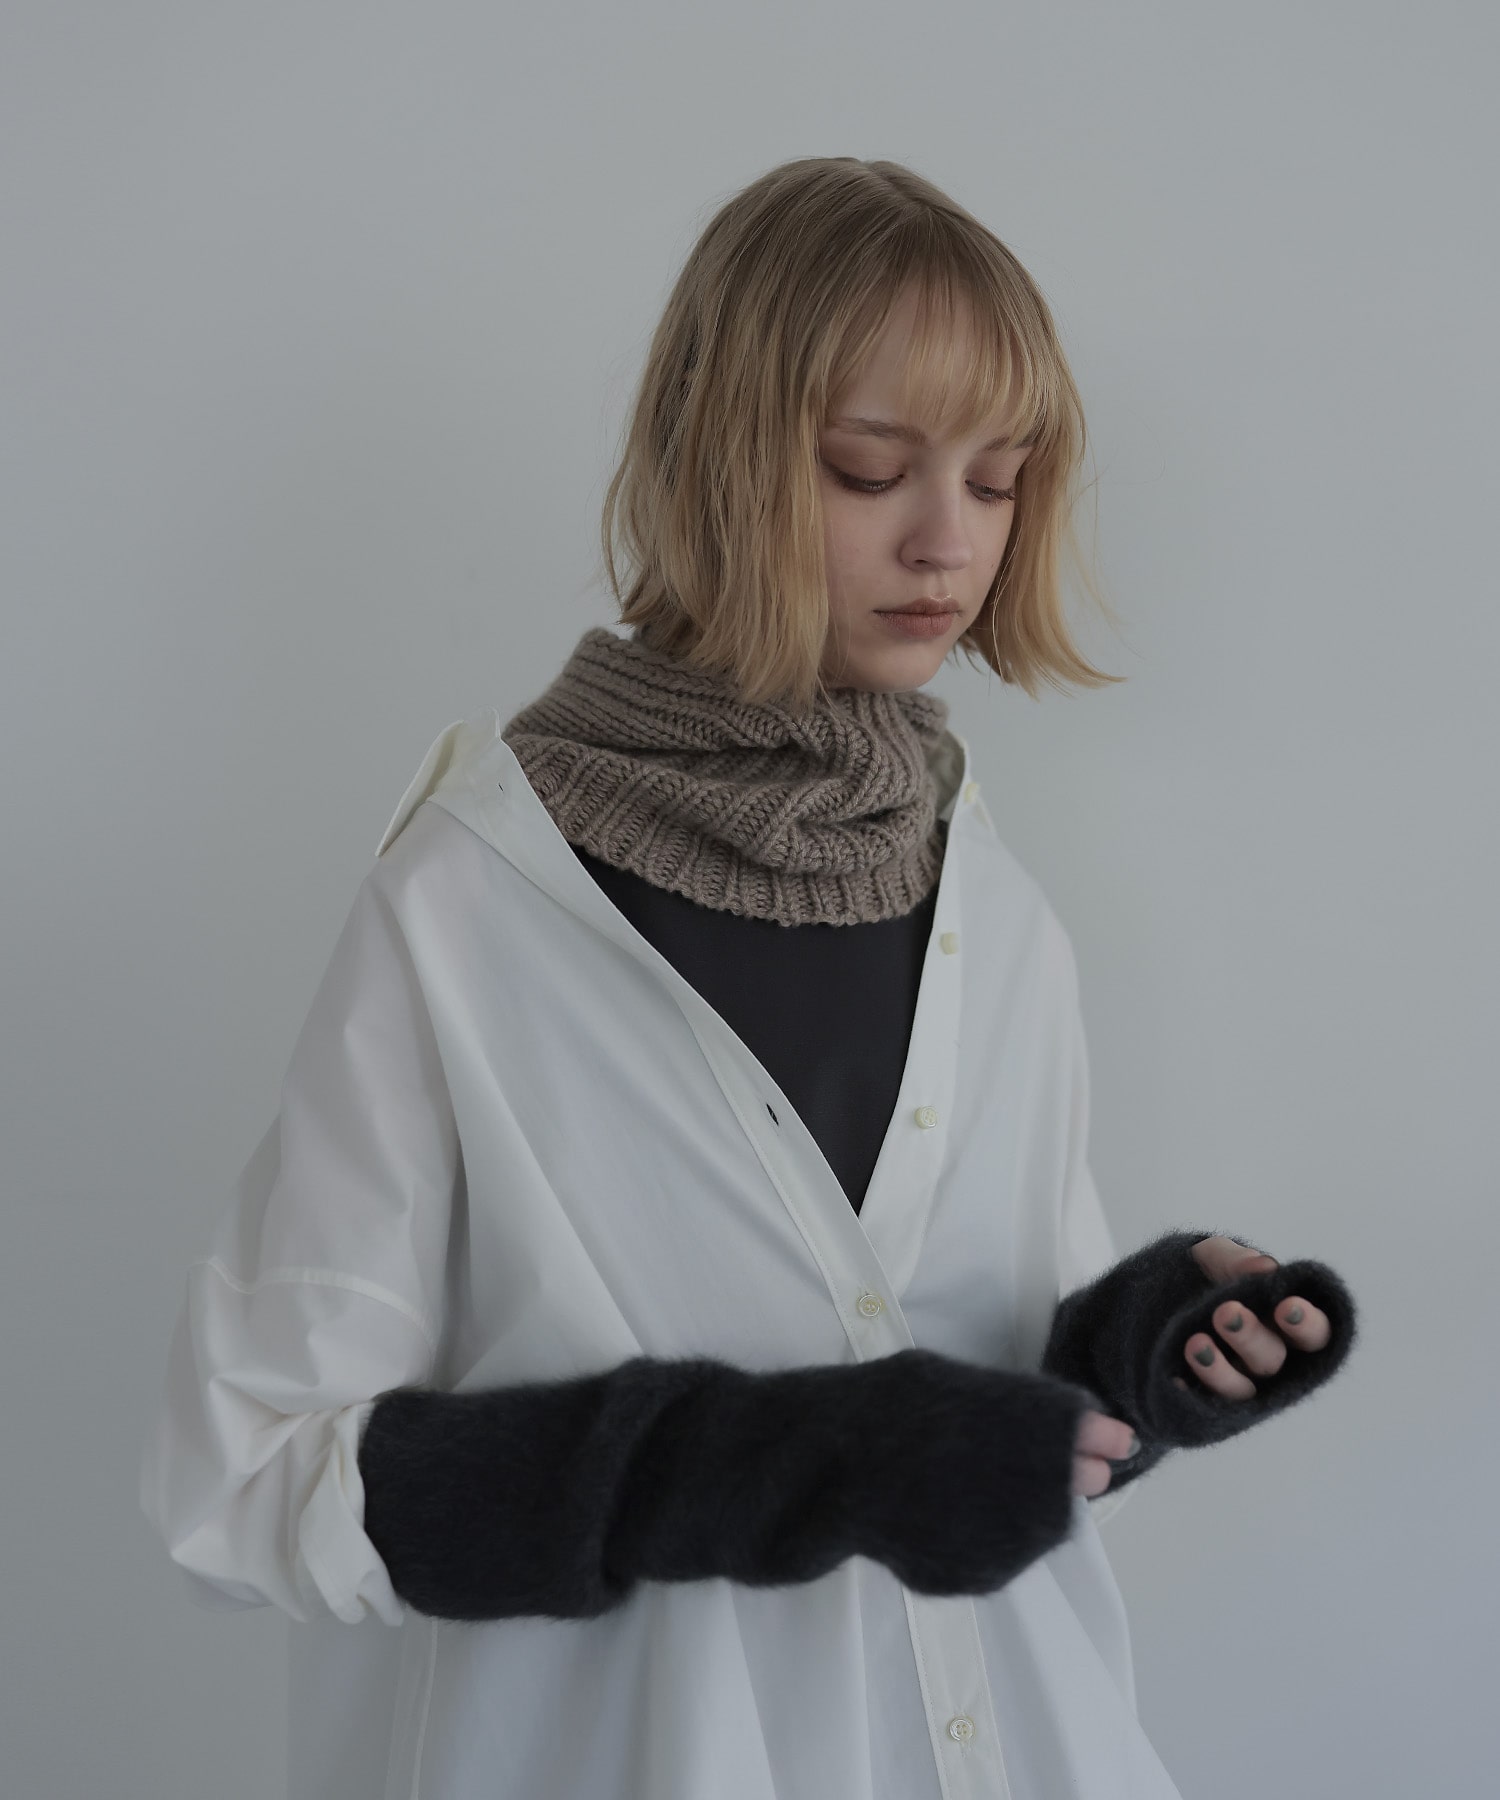 typewriter ×jersey join blouse | AND ON JIONE STORE（アンドオン